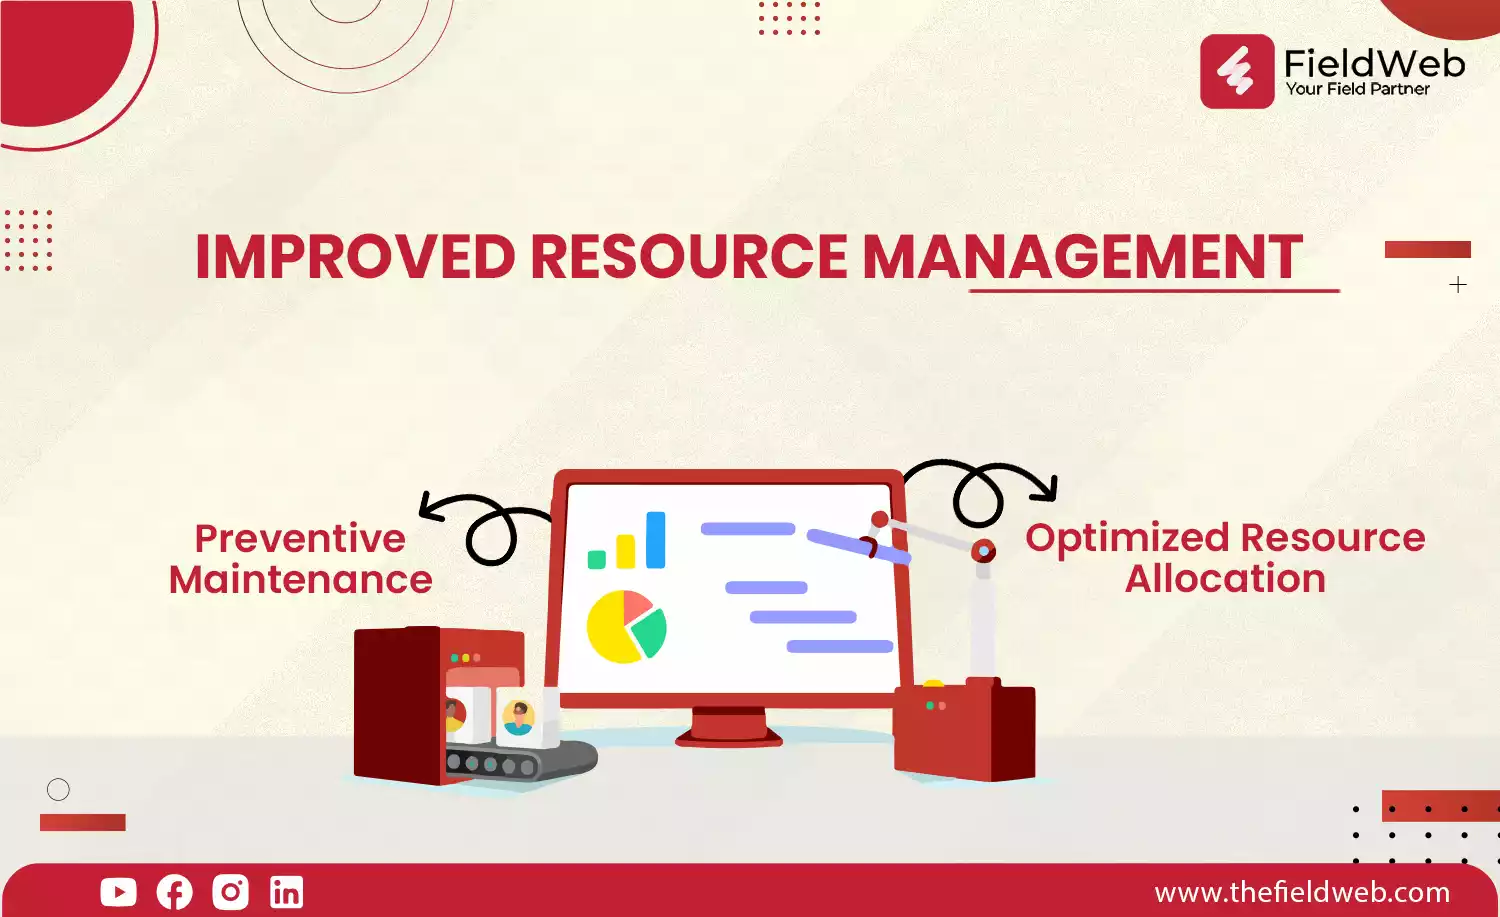 image is displaying you can imporved your resource management with software